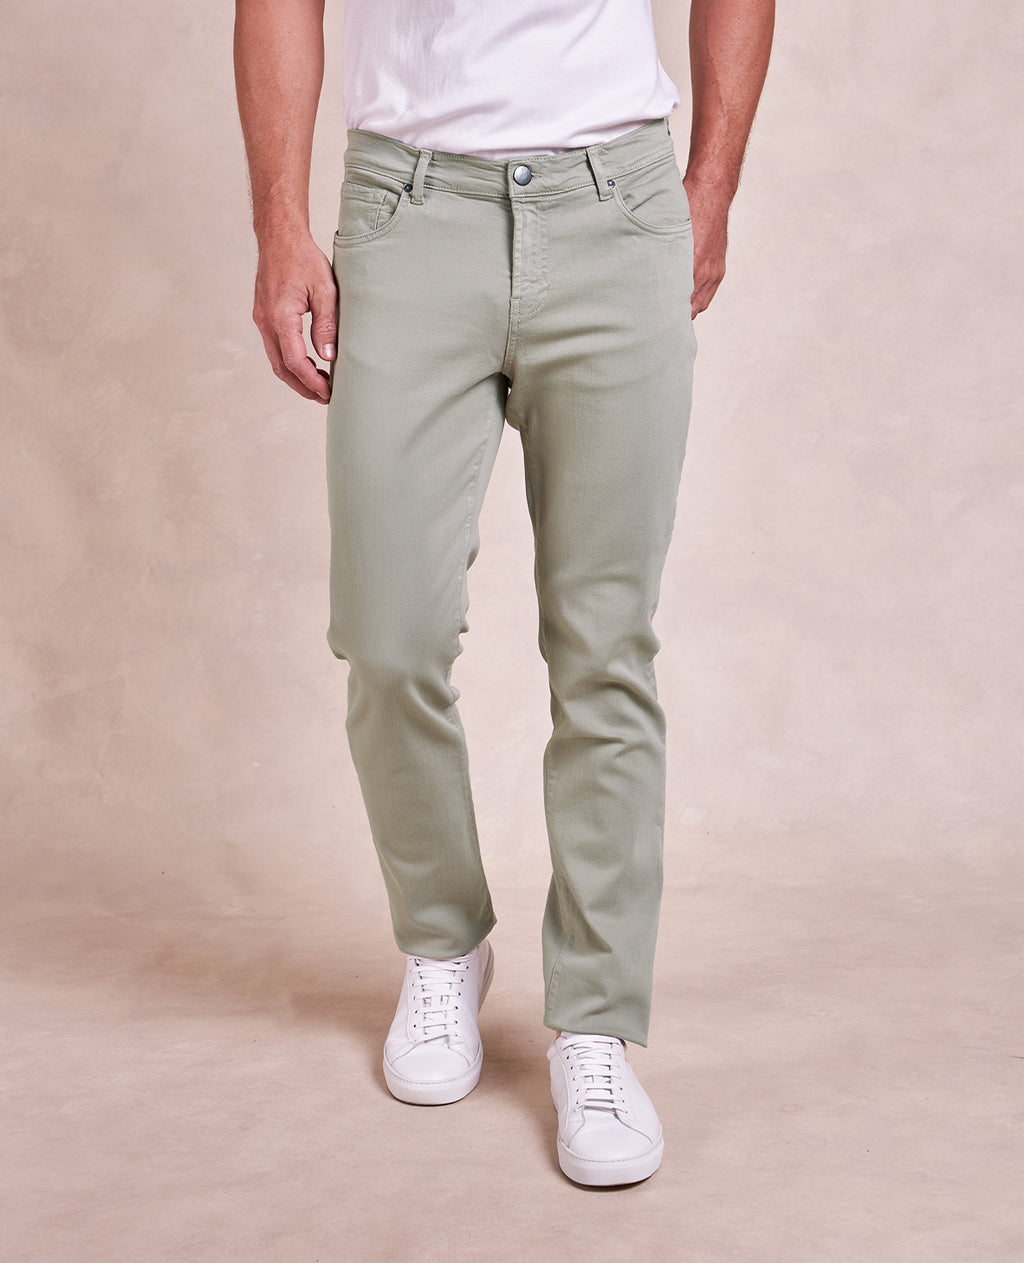 R51 Pant - French Twill Stretch 5-Pocket - Light Moss